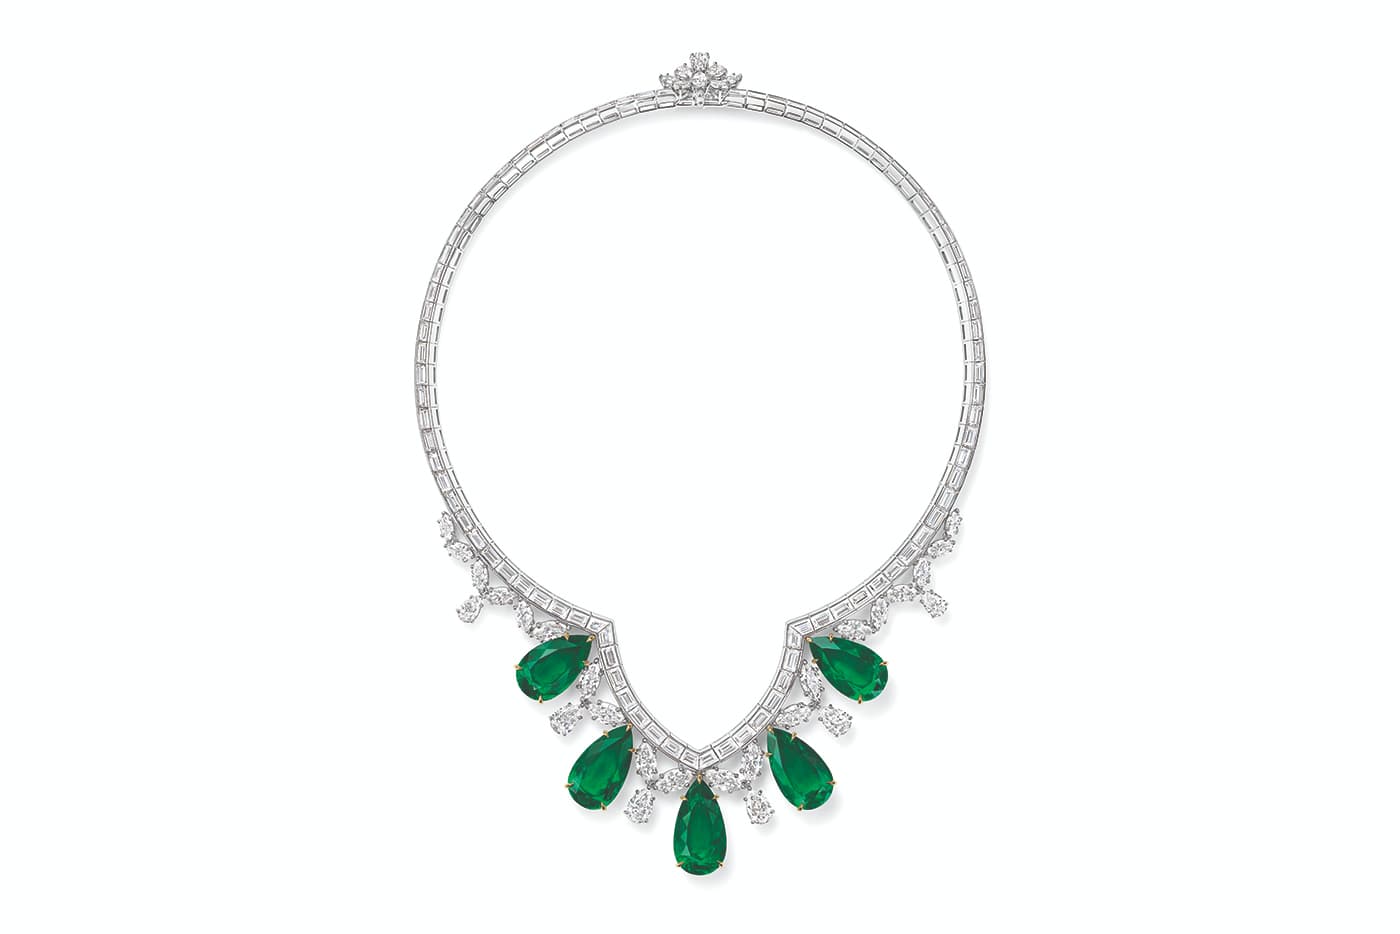 Harry Winston 'New York' collection ‘Cathedral’ necklace with pear cut Colombian emeralds and diamonds in platinum